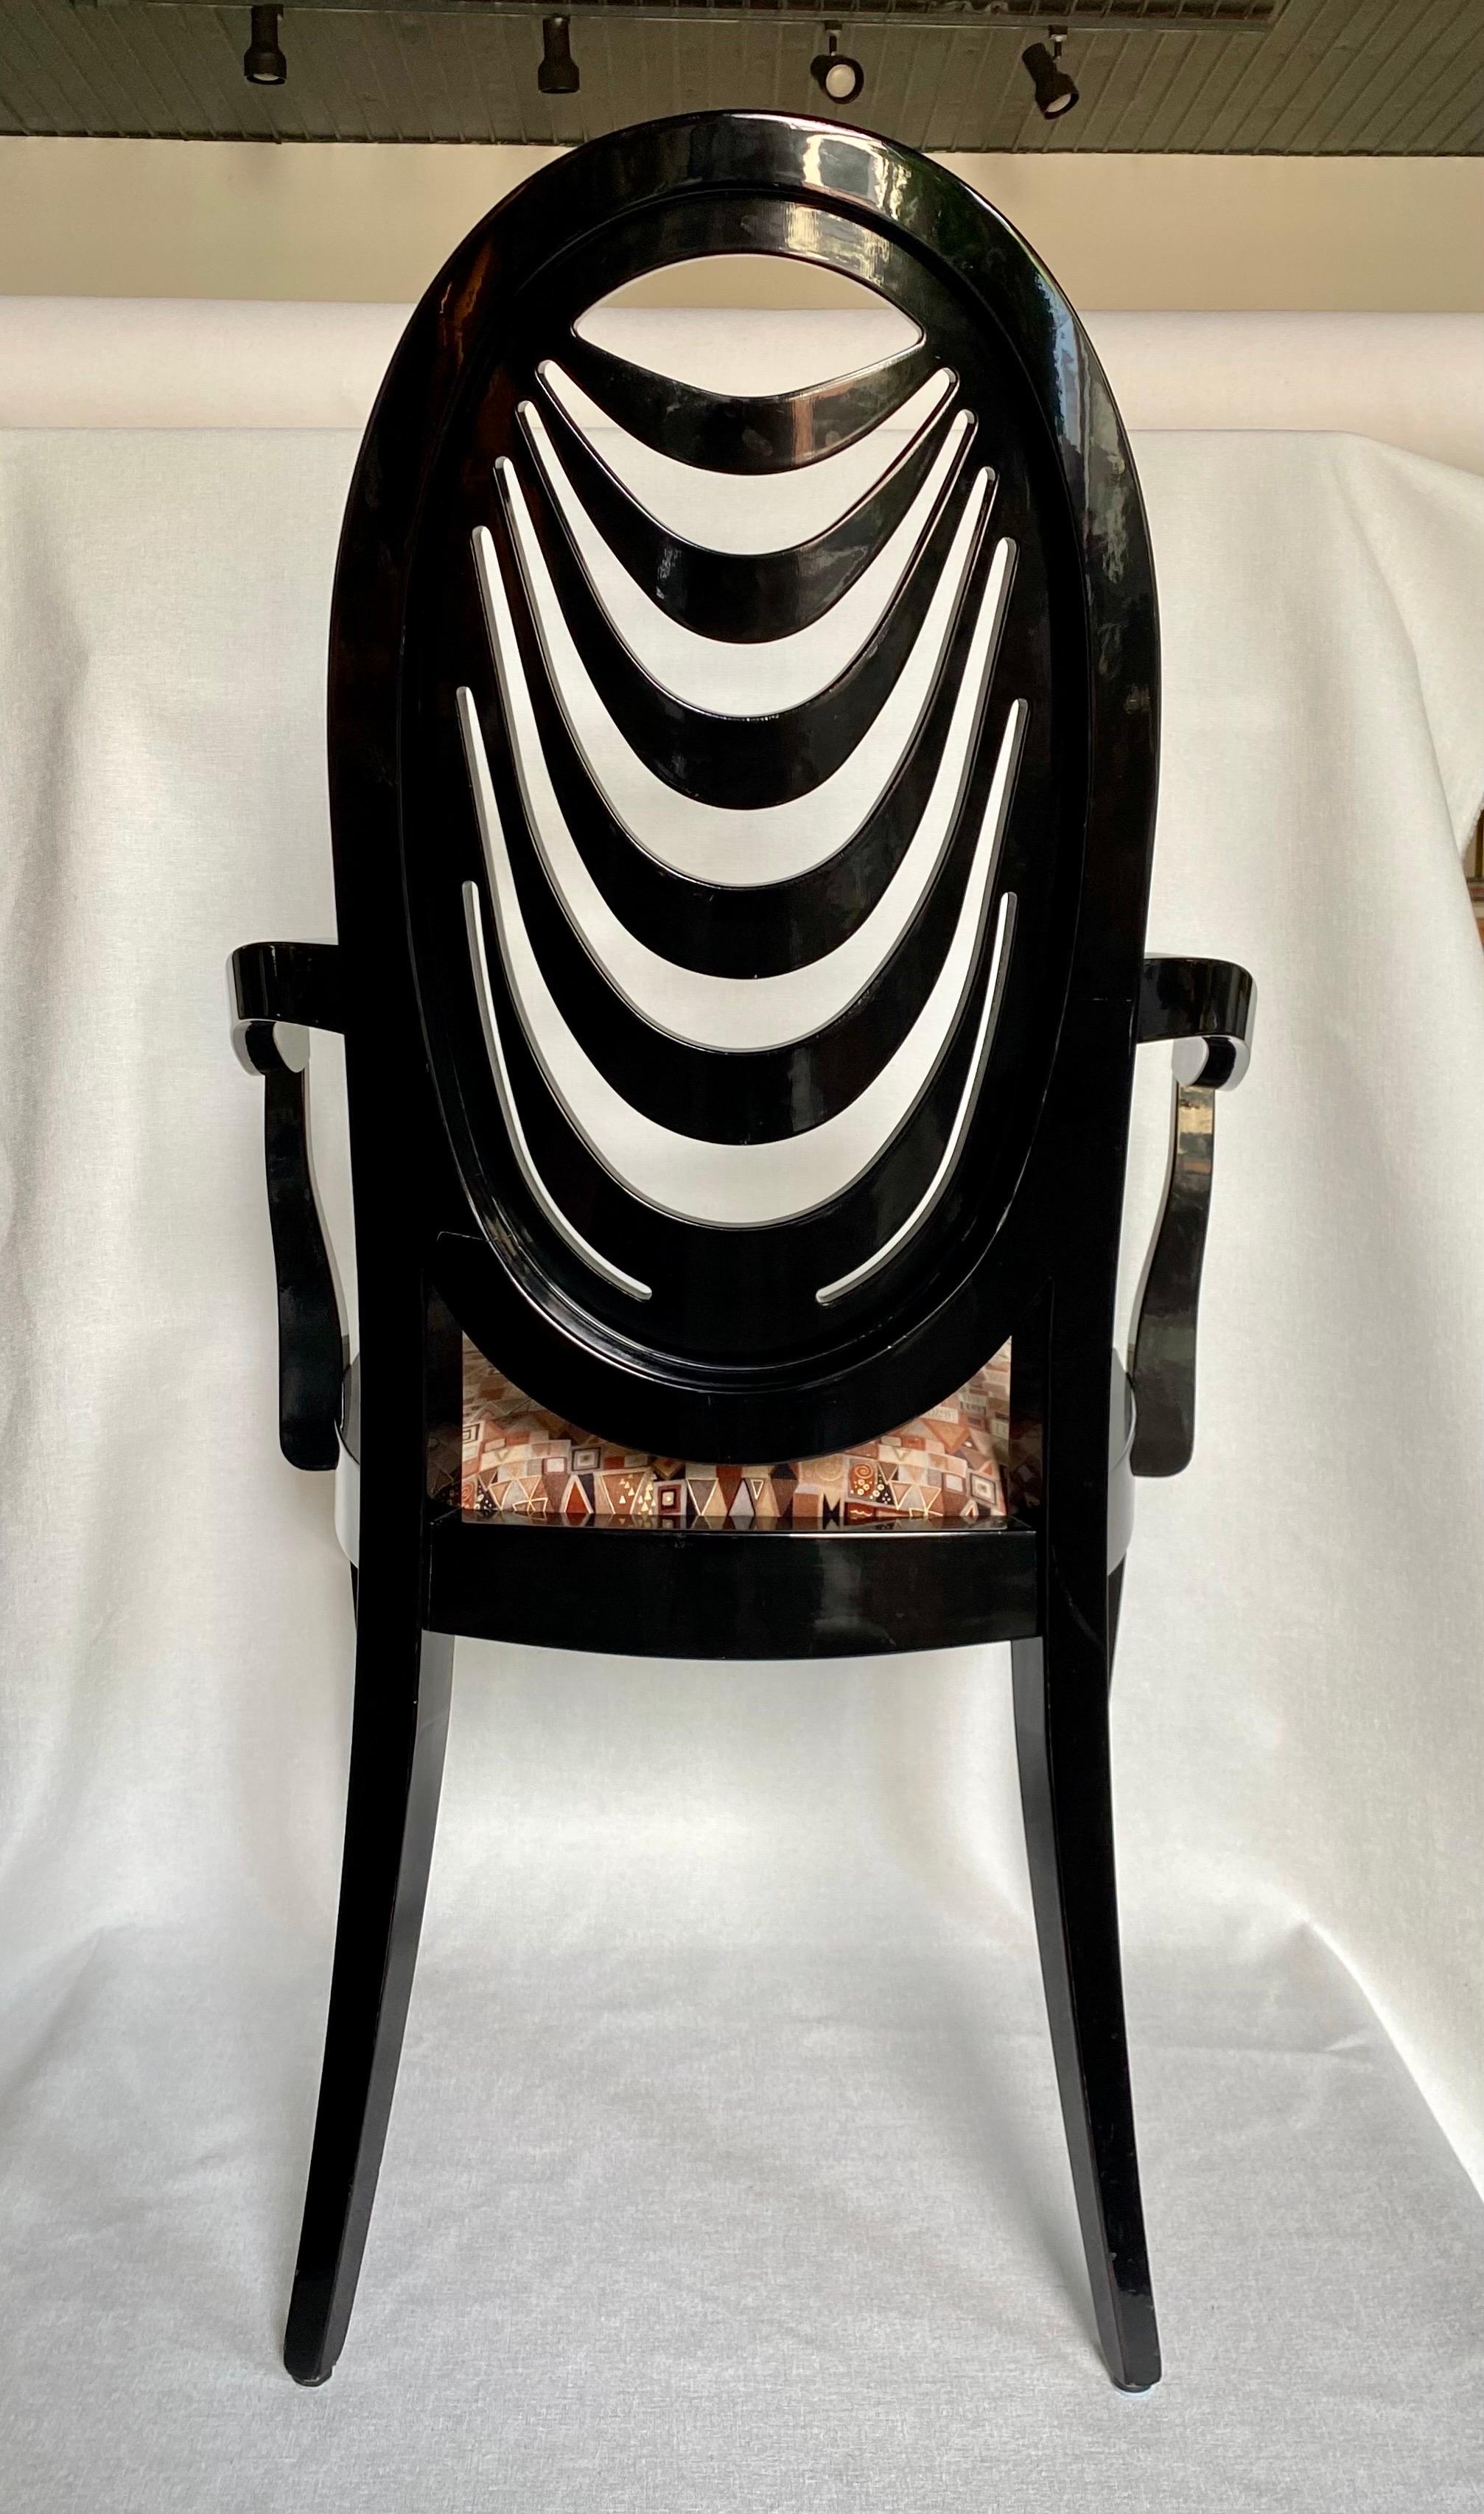 Fabulous Hollywood Regency Style Italian black lacquer armchair designed by Pietro Costantini for Ello Furniture. This sculptural accent or desk chair features a graphic draped back with curved cabriole legs. Original gloss black lacquer finish and